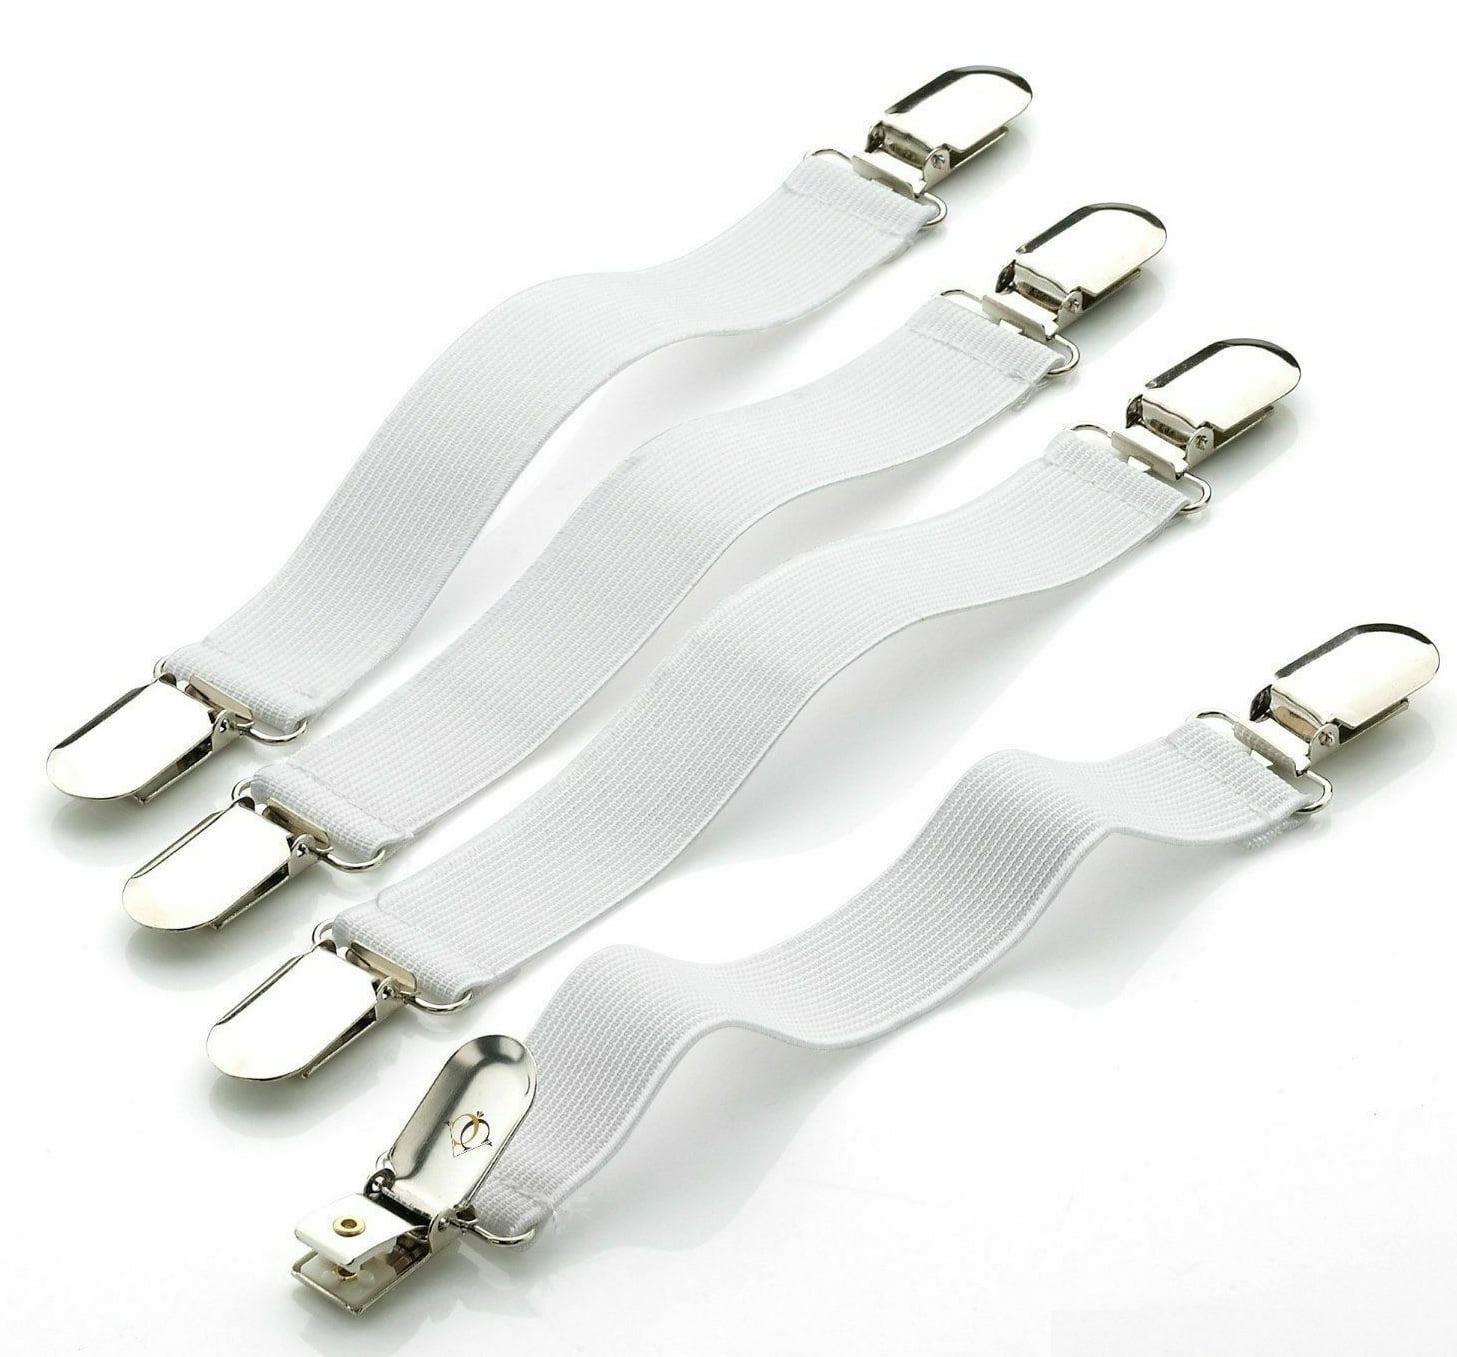 Elastic Suspenders *NEW* 4 Packs Bed Sheet Straps Fasteners with Metal Clasp 